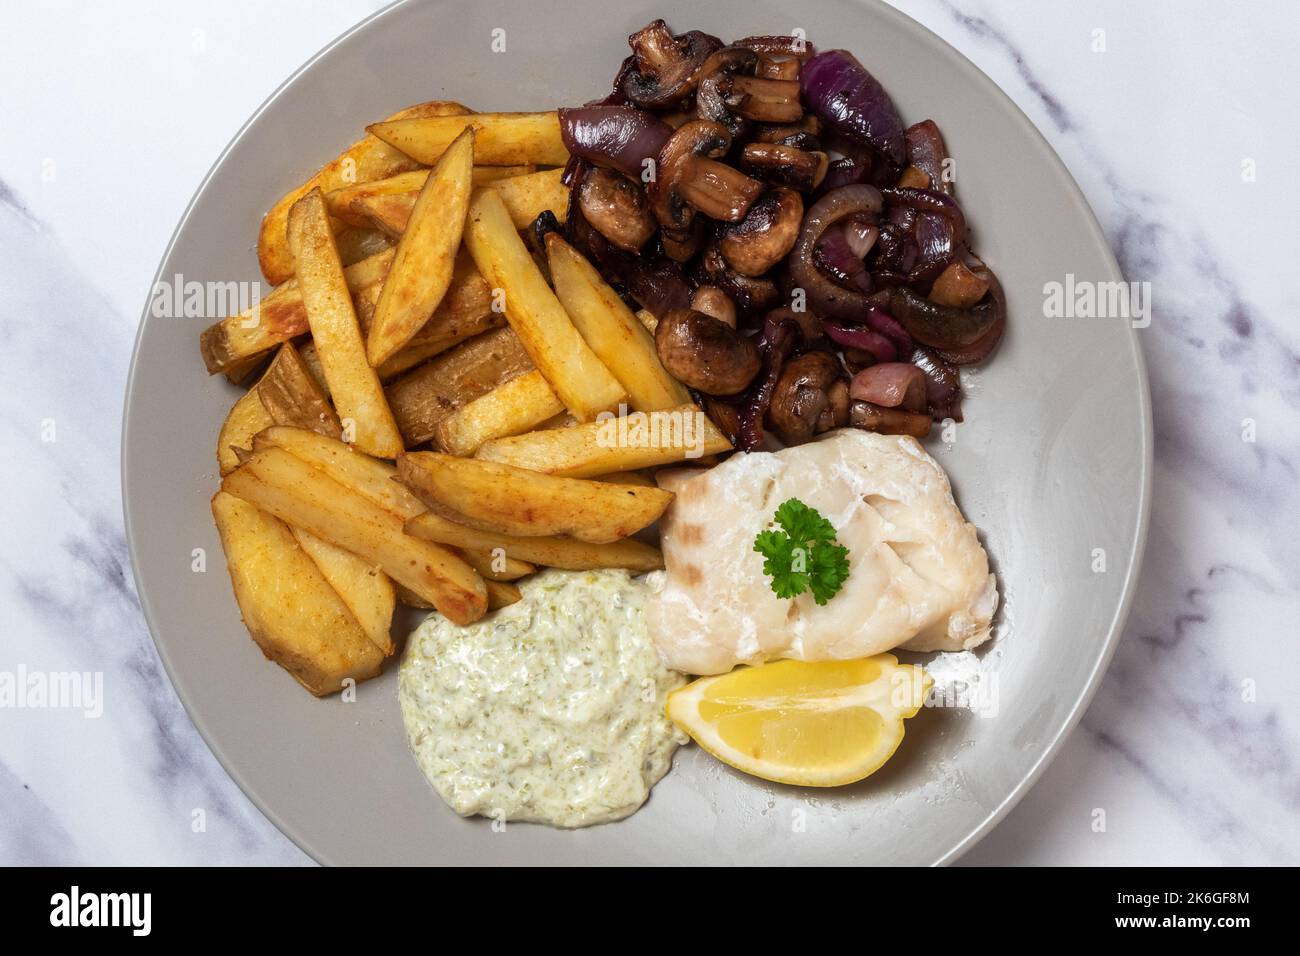 Baked cod loin, skin on chips, sauteed mushroom and red onion, tartare sauce, seen from above Stock Photo